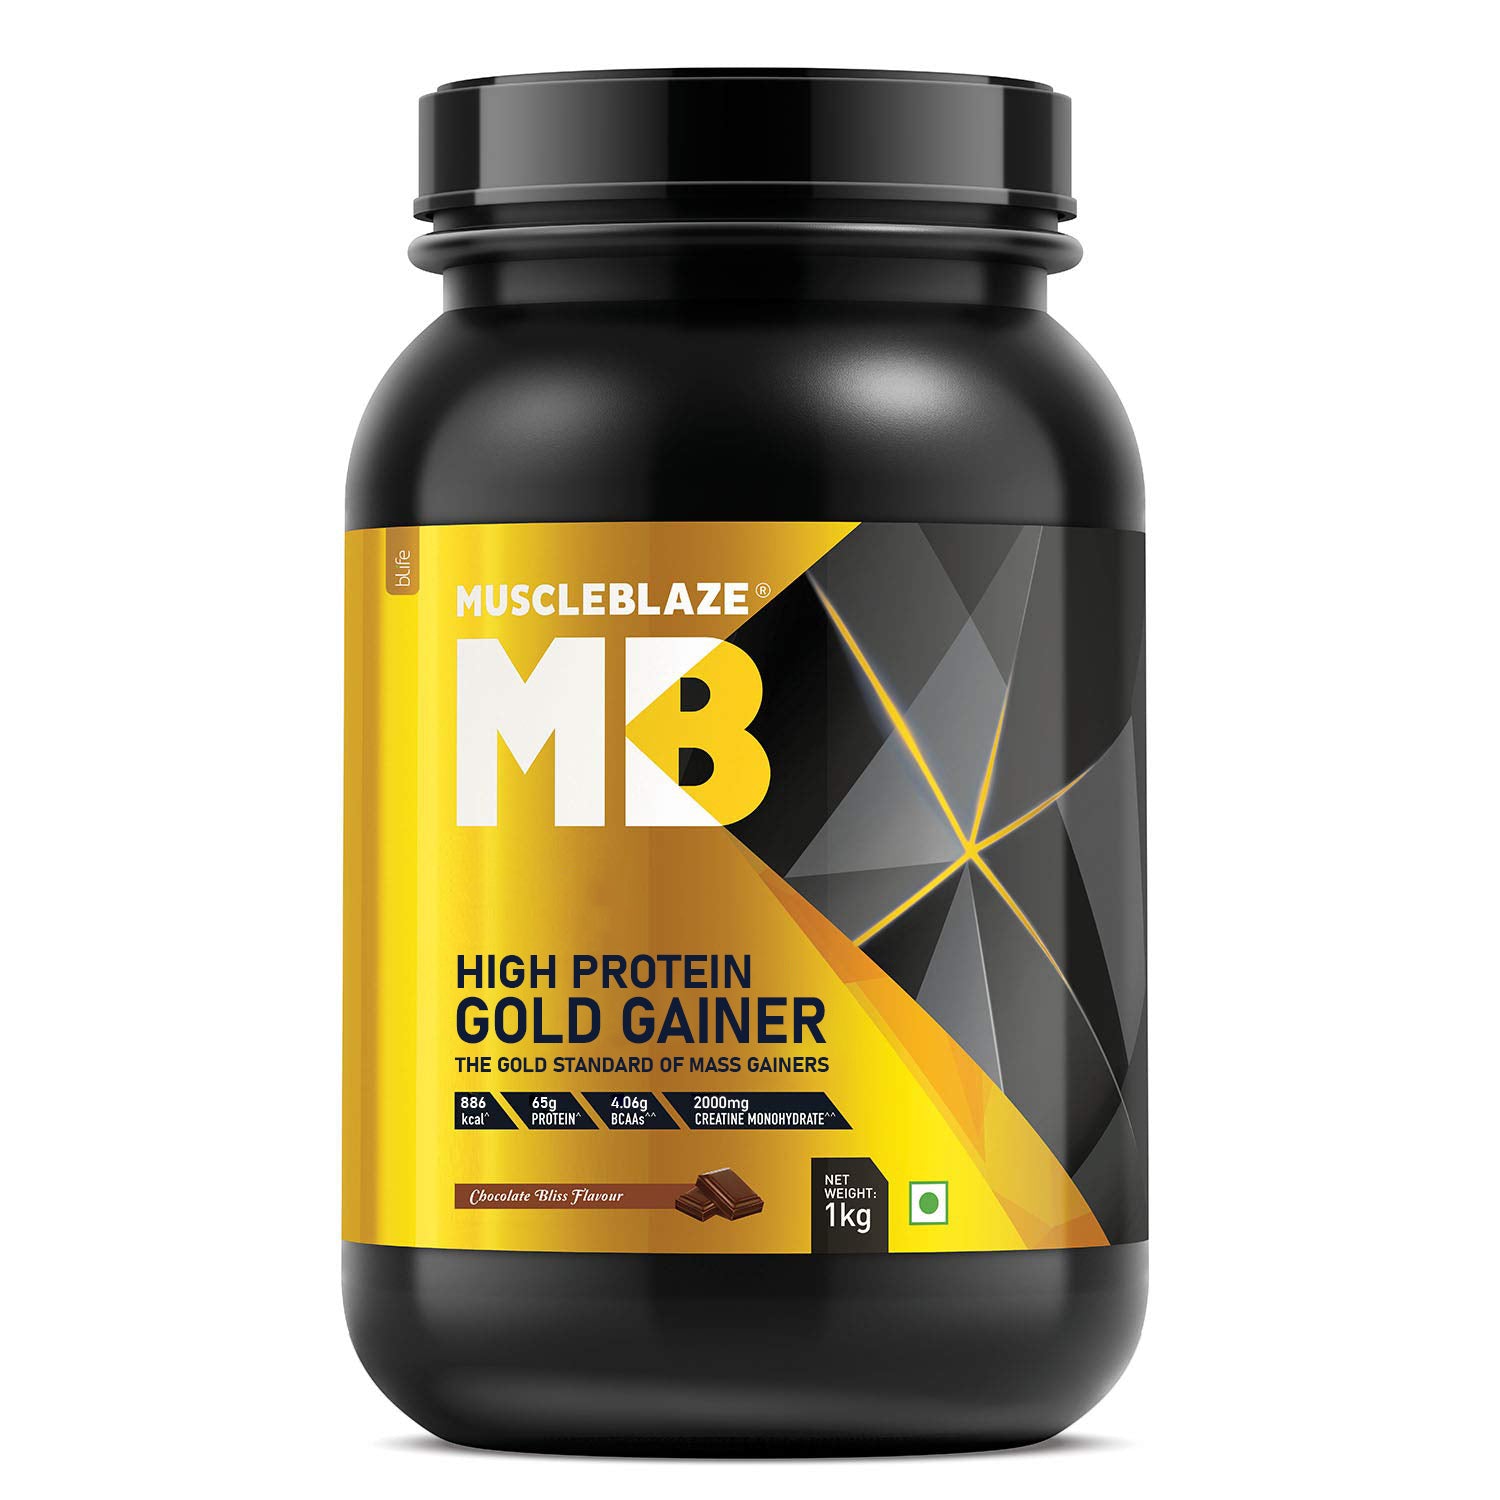 MuscleBlaze High Protein Gold Gainer